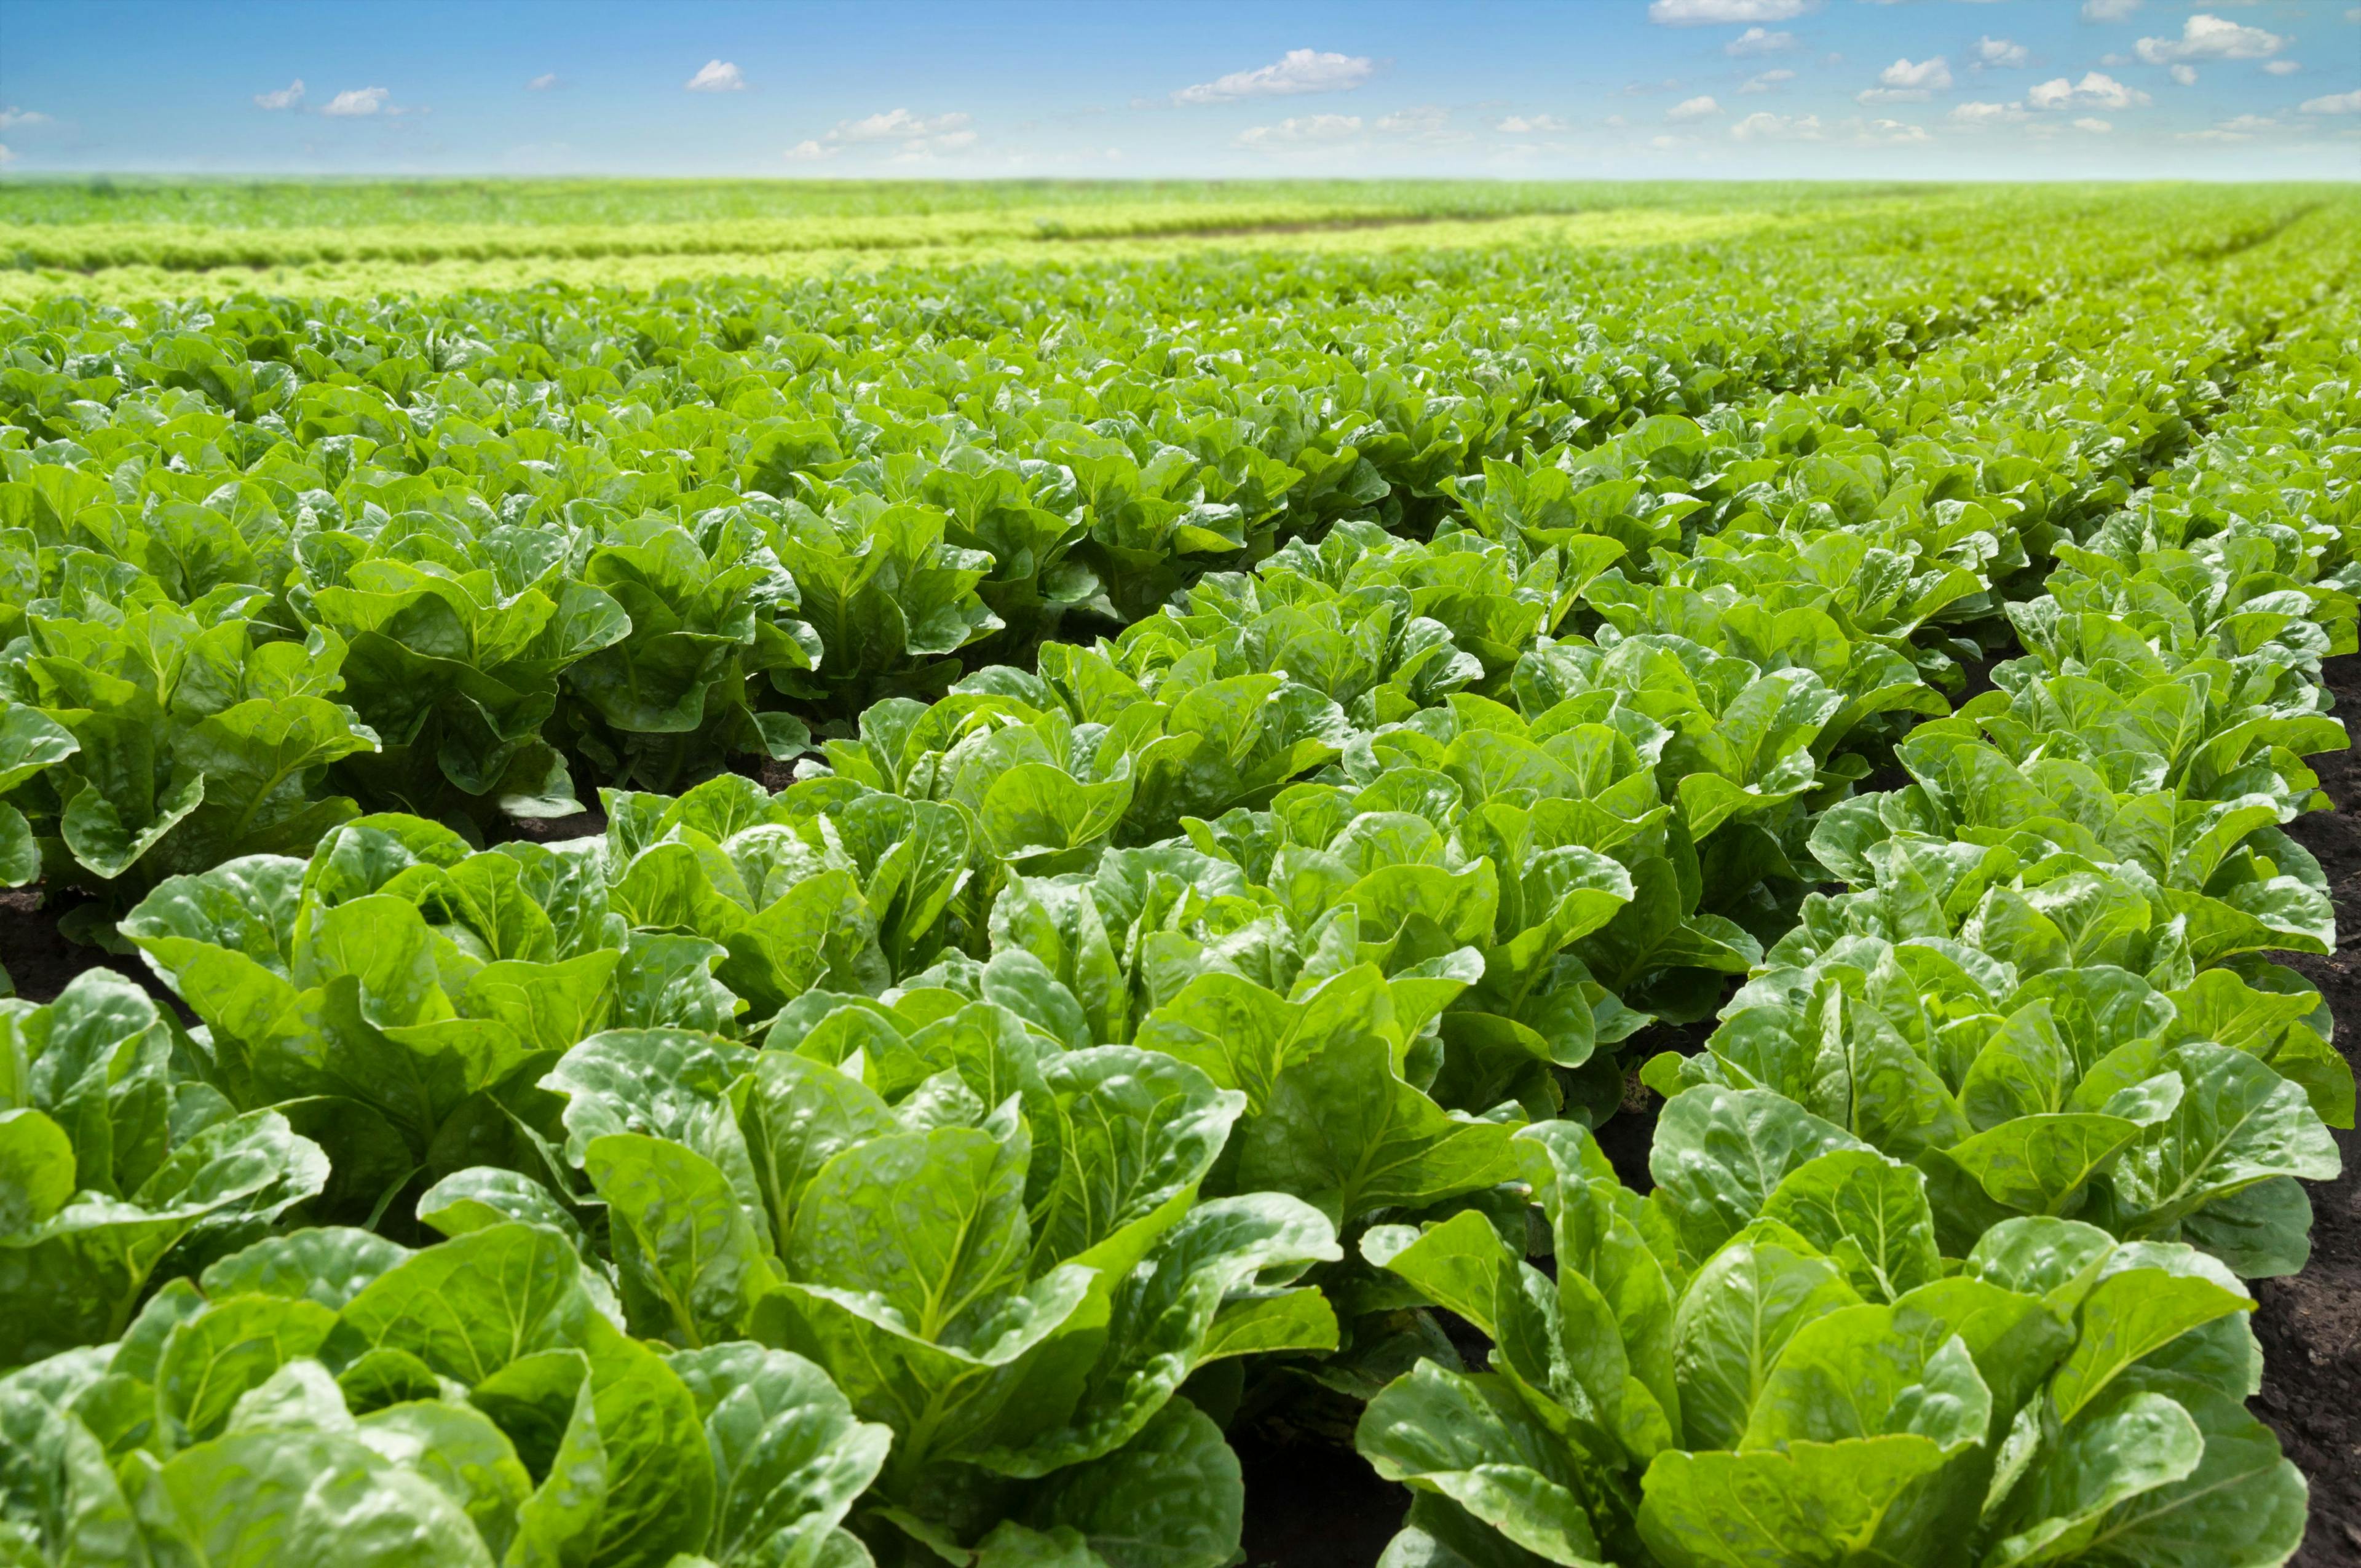 Growing lettuce in rows in a field on a sunny day. | Image Credit: © zoyas2222 - stock.adobe.com.